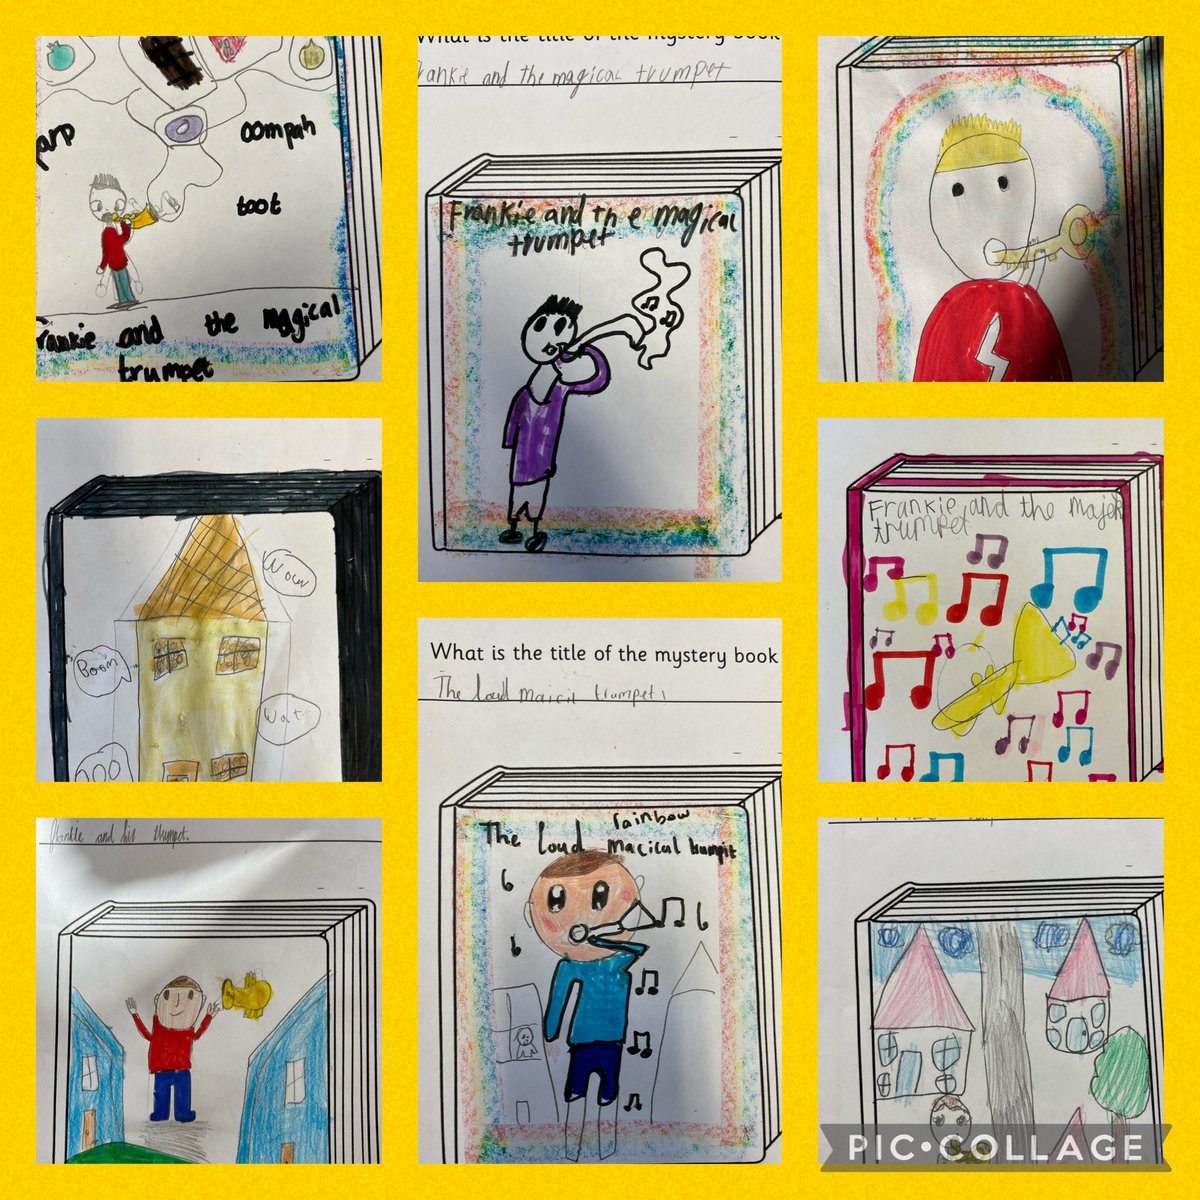 P4 are predicting the title of the mystery book. Look at our ideas and front cover designs. #lovereadingstnics #literacystnics #believingandachievingstnics #p4stnics